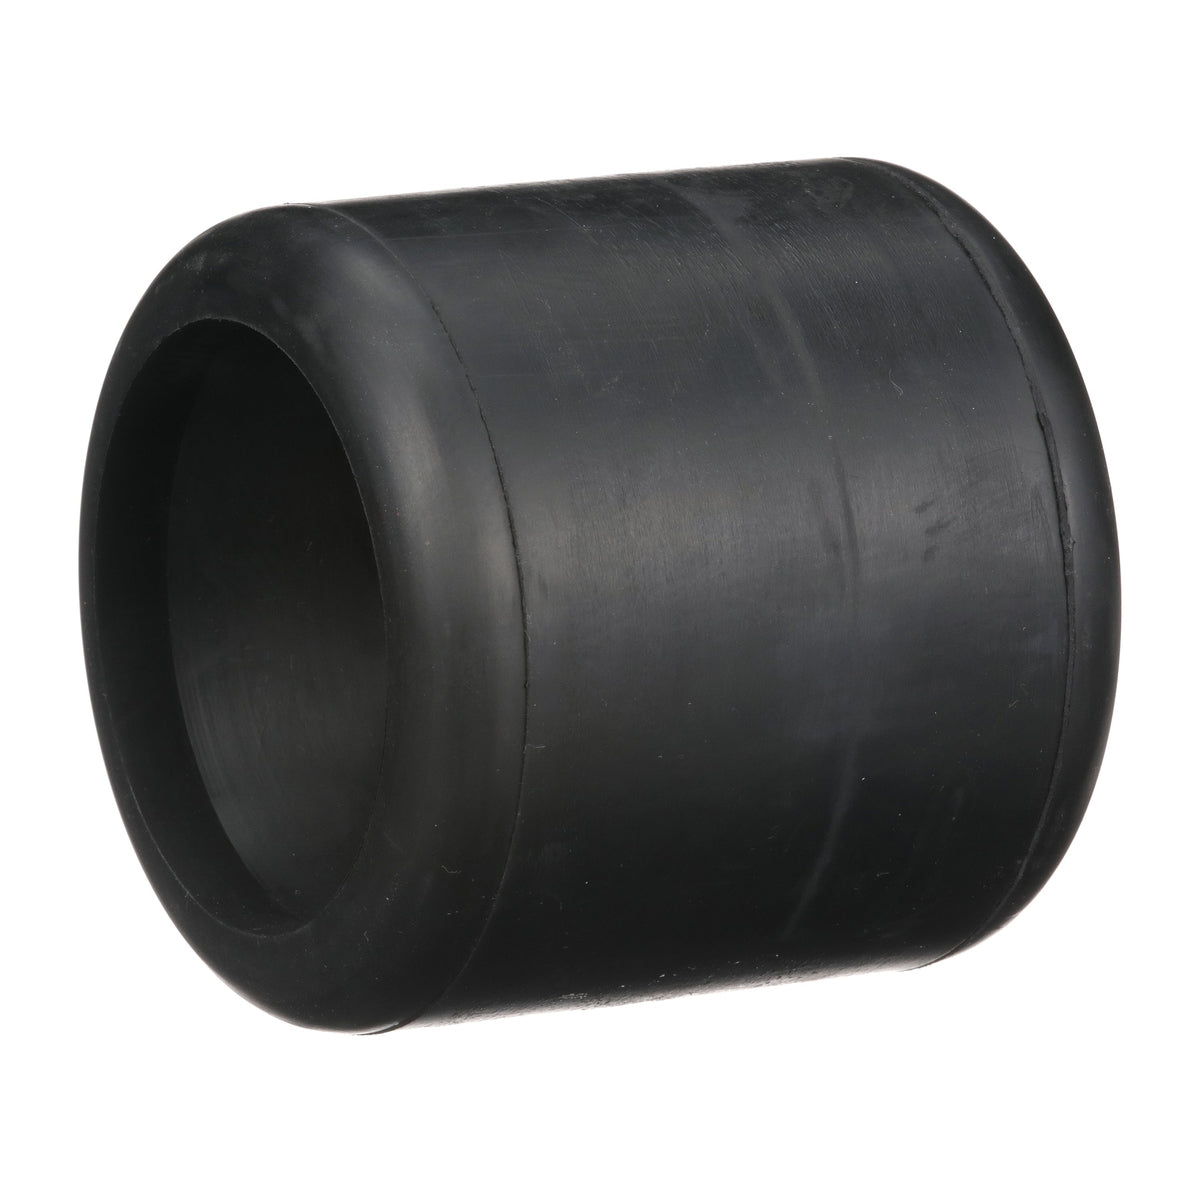 Attwood Marine Qualifies for Free Shipping Attwood Trailer Adjusting Roller Rubber Smooth 4-1/4" x 4-3/8" #11230-1